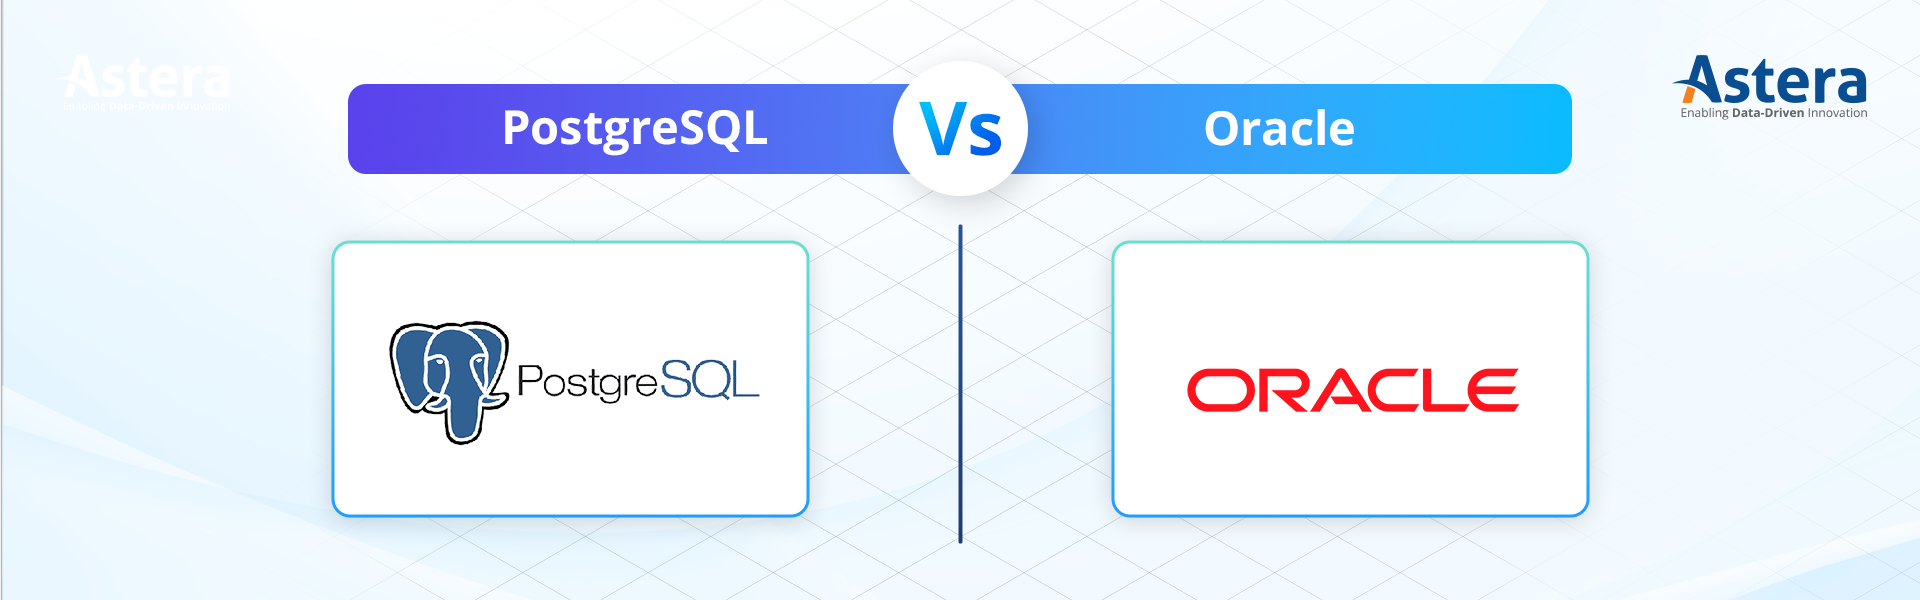 PostgreSQL Vs. Oracle: What's the Difference?